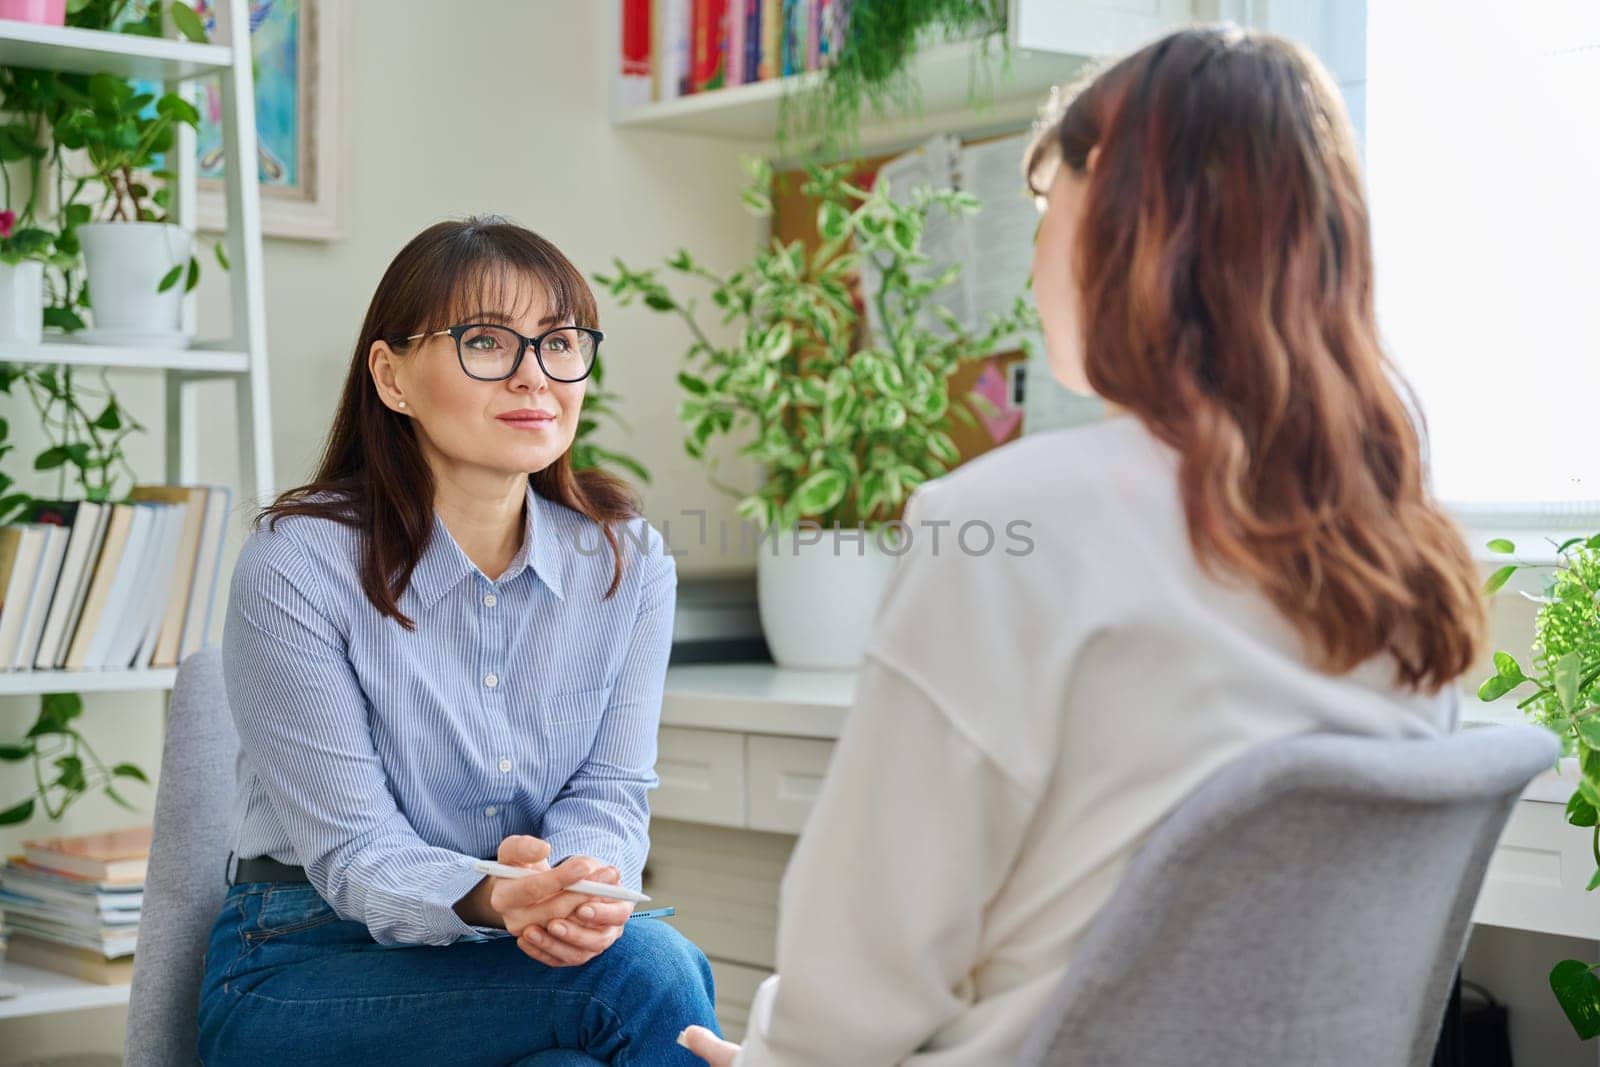 Female psychologist psychotherapist therapist counselor social worker talking working with young woman, meeting session therapy in office. Mental health, psychology psychotherapy counseling, youth